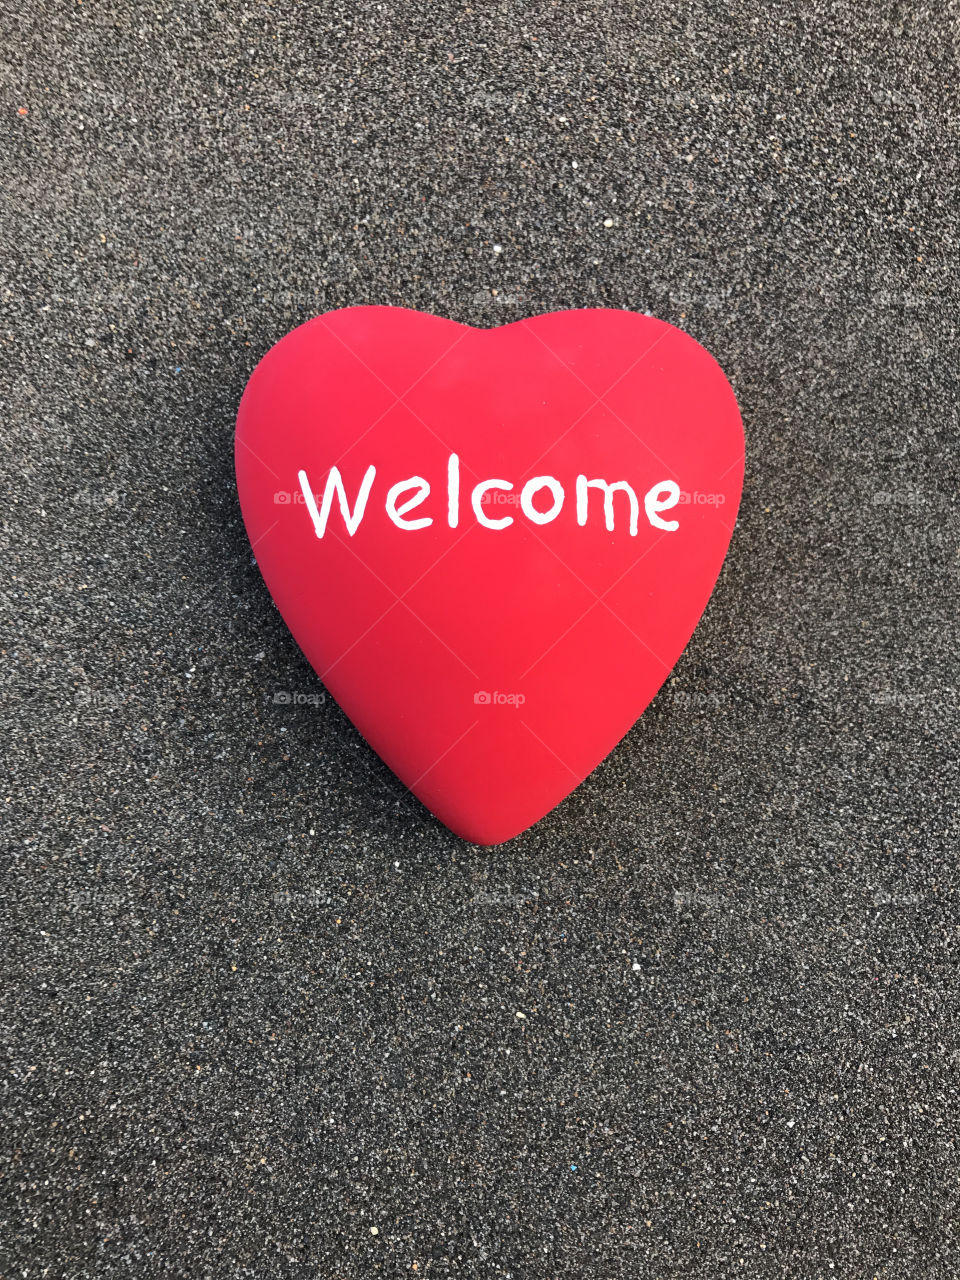 High angle view of welcome text on heart shape